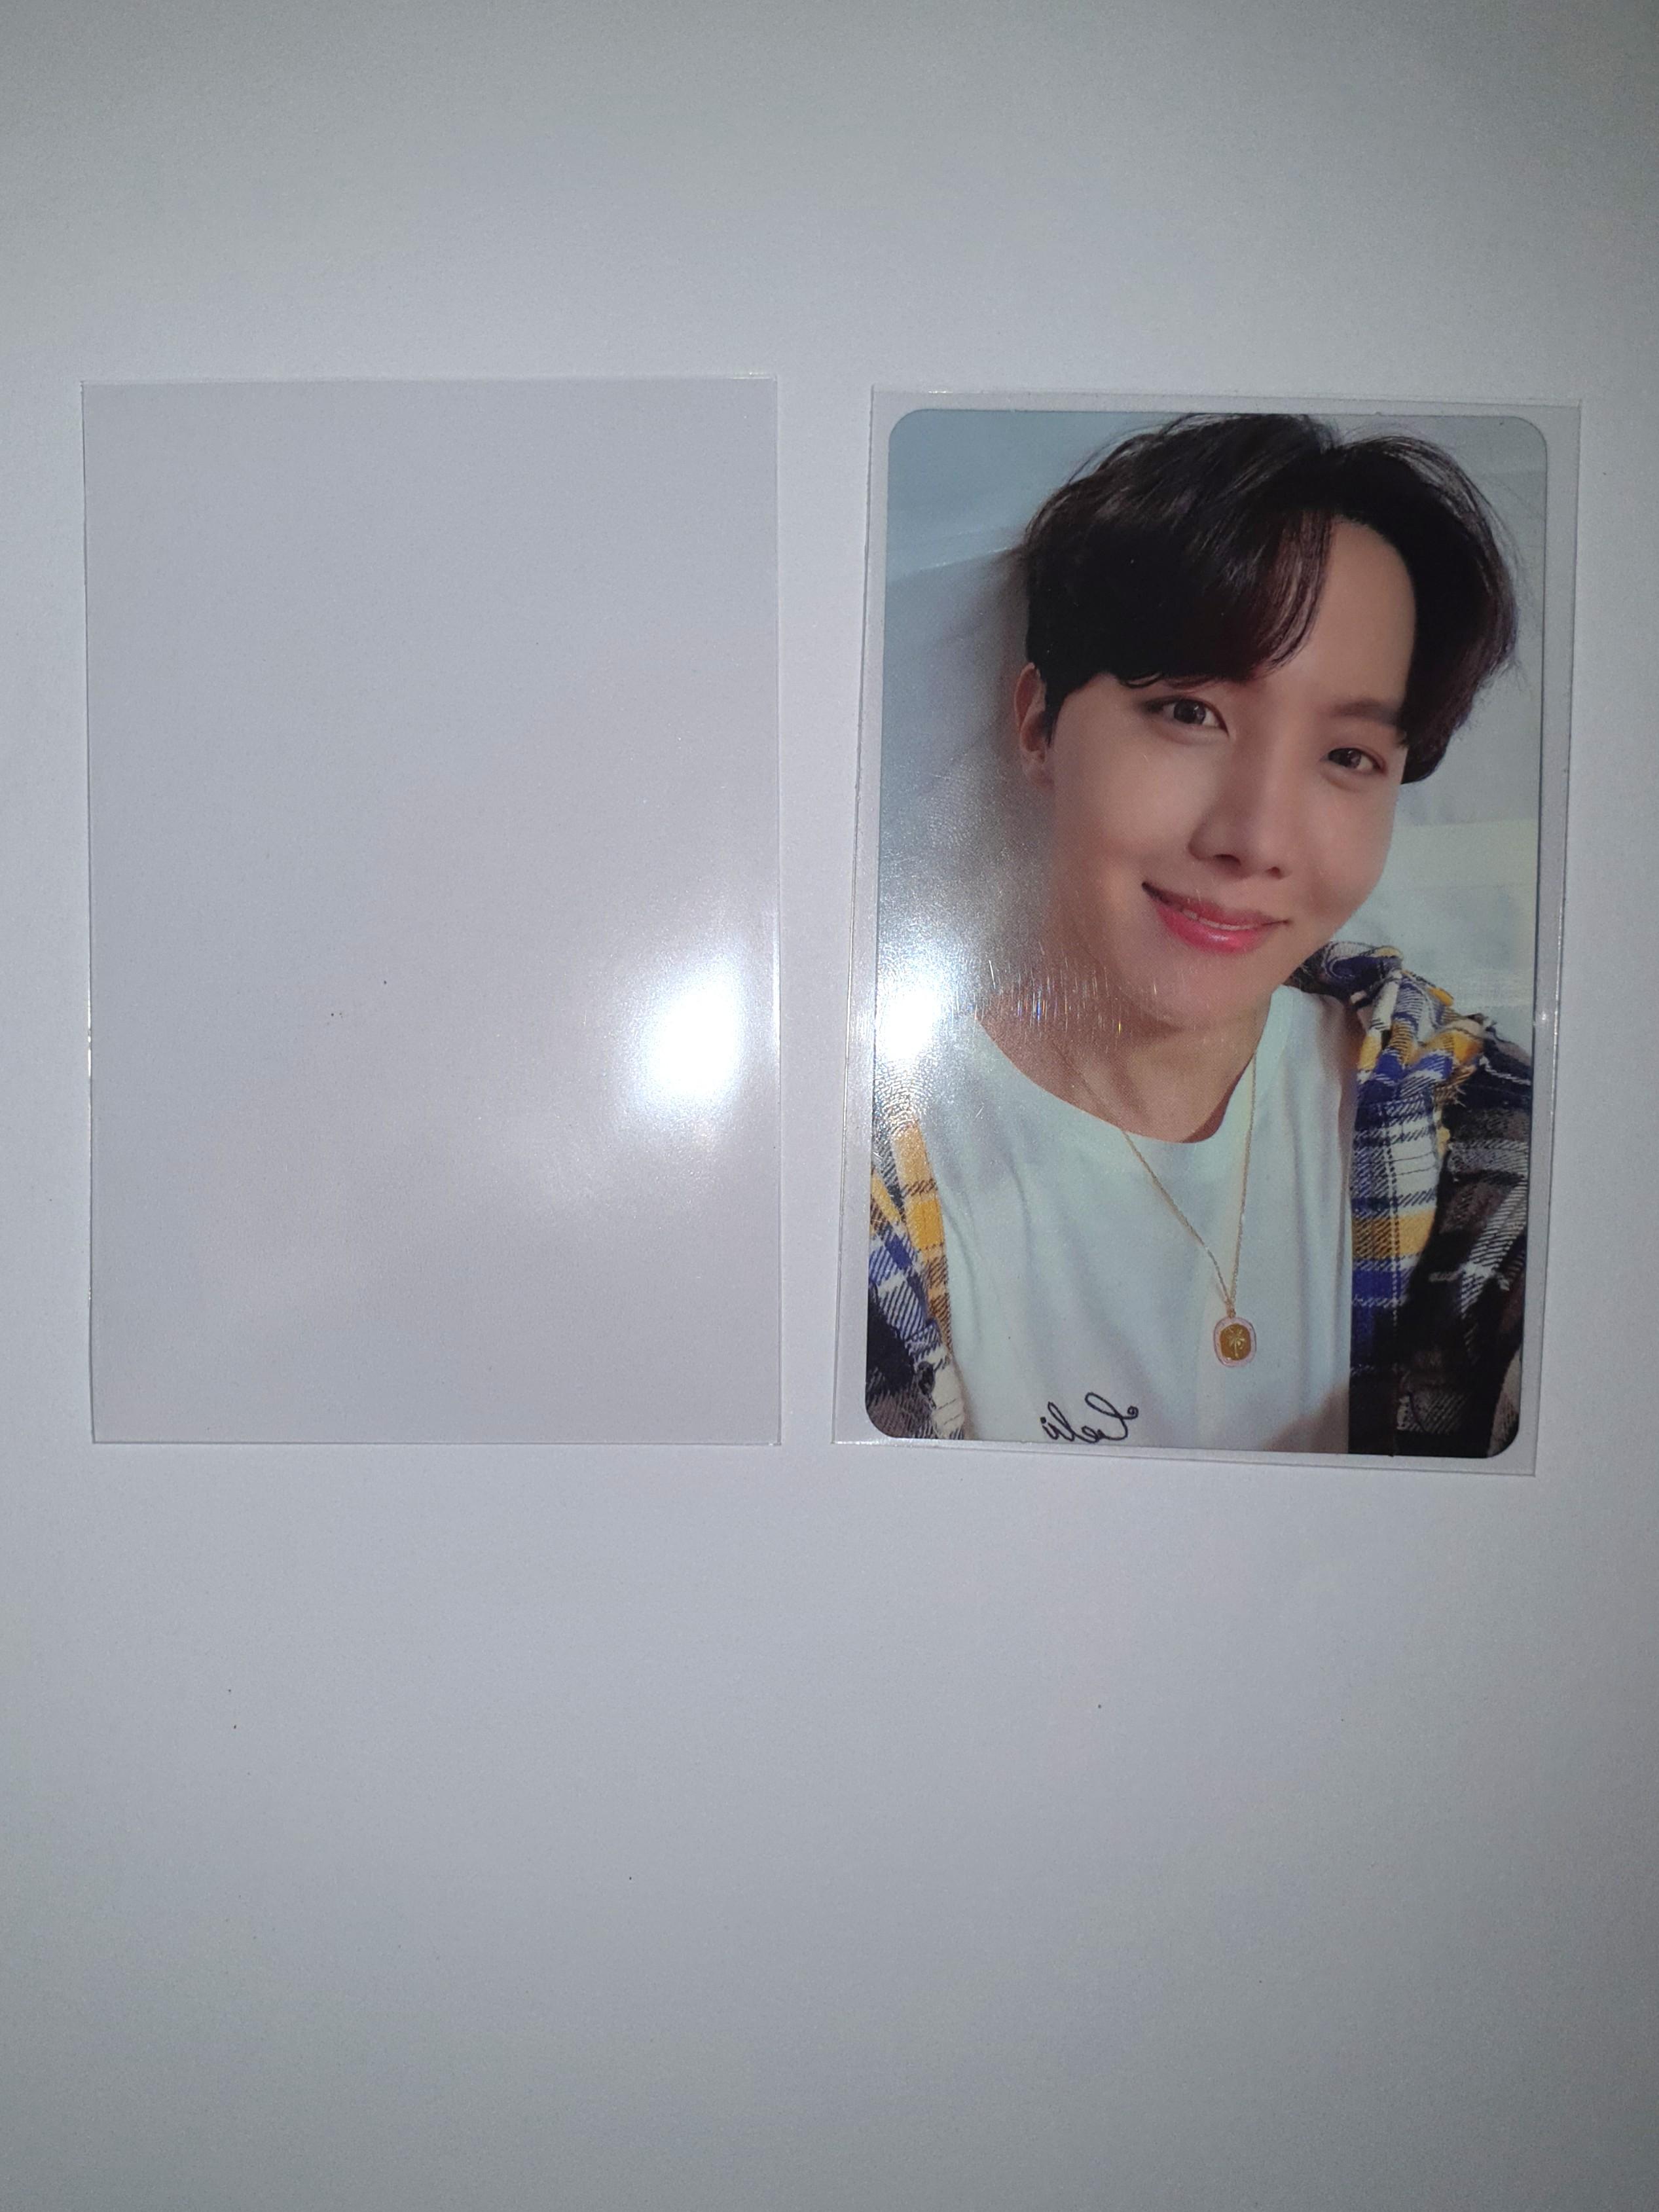 Wts Pc Photocard Sleeves Non Reasealable Penny Sleeves Bts Nct Seventeen Svt Atz Ateez Iu